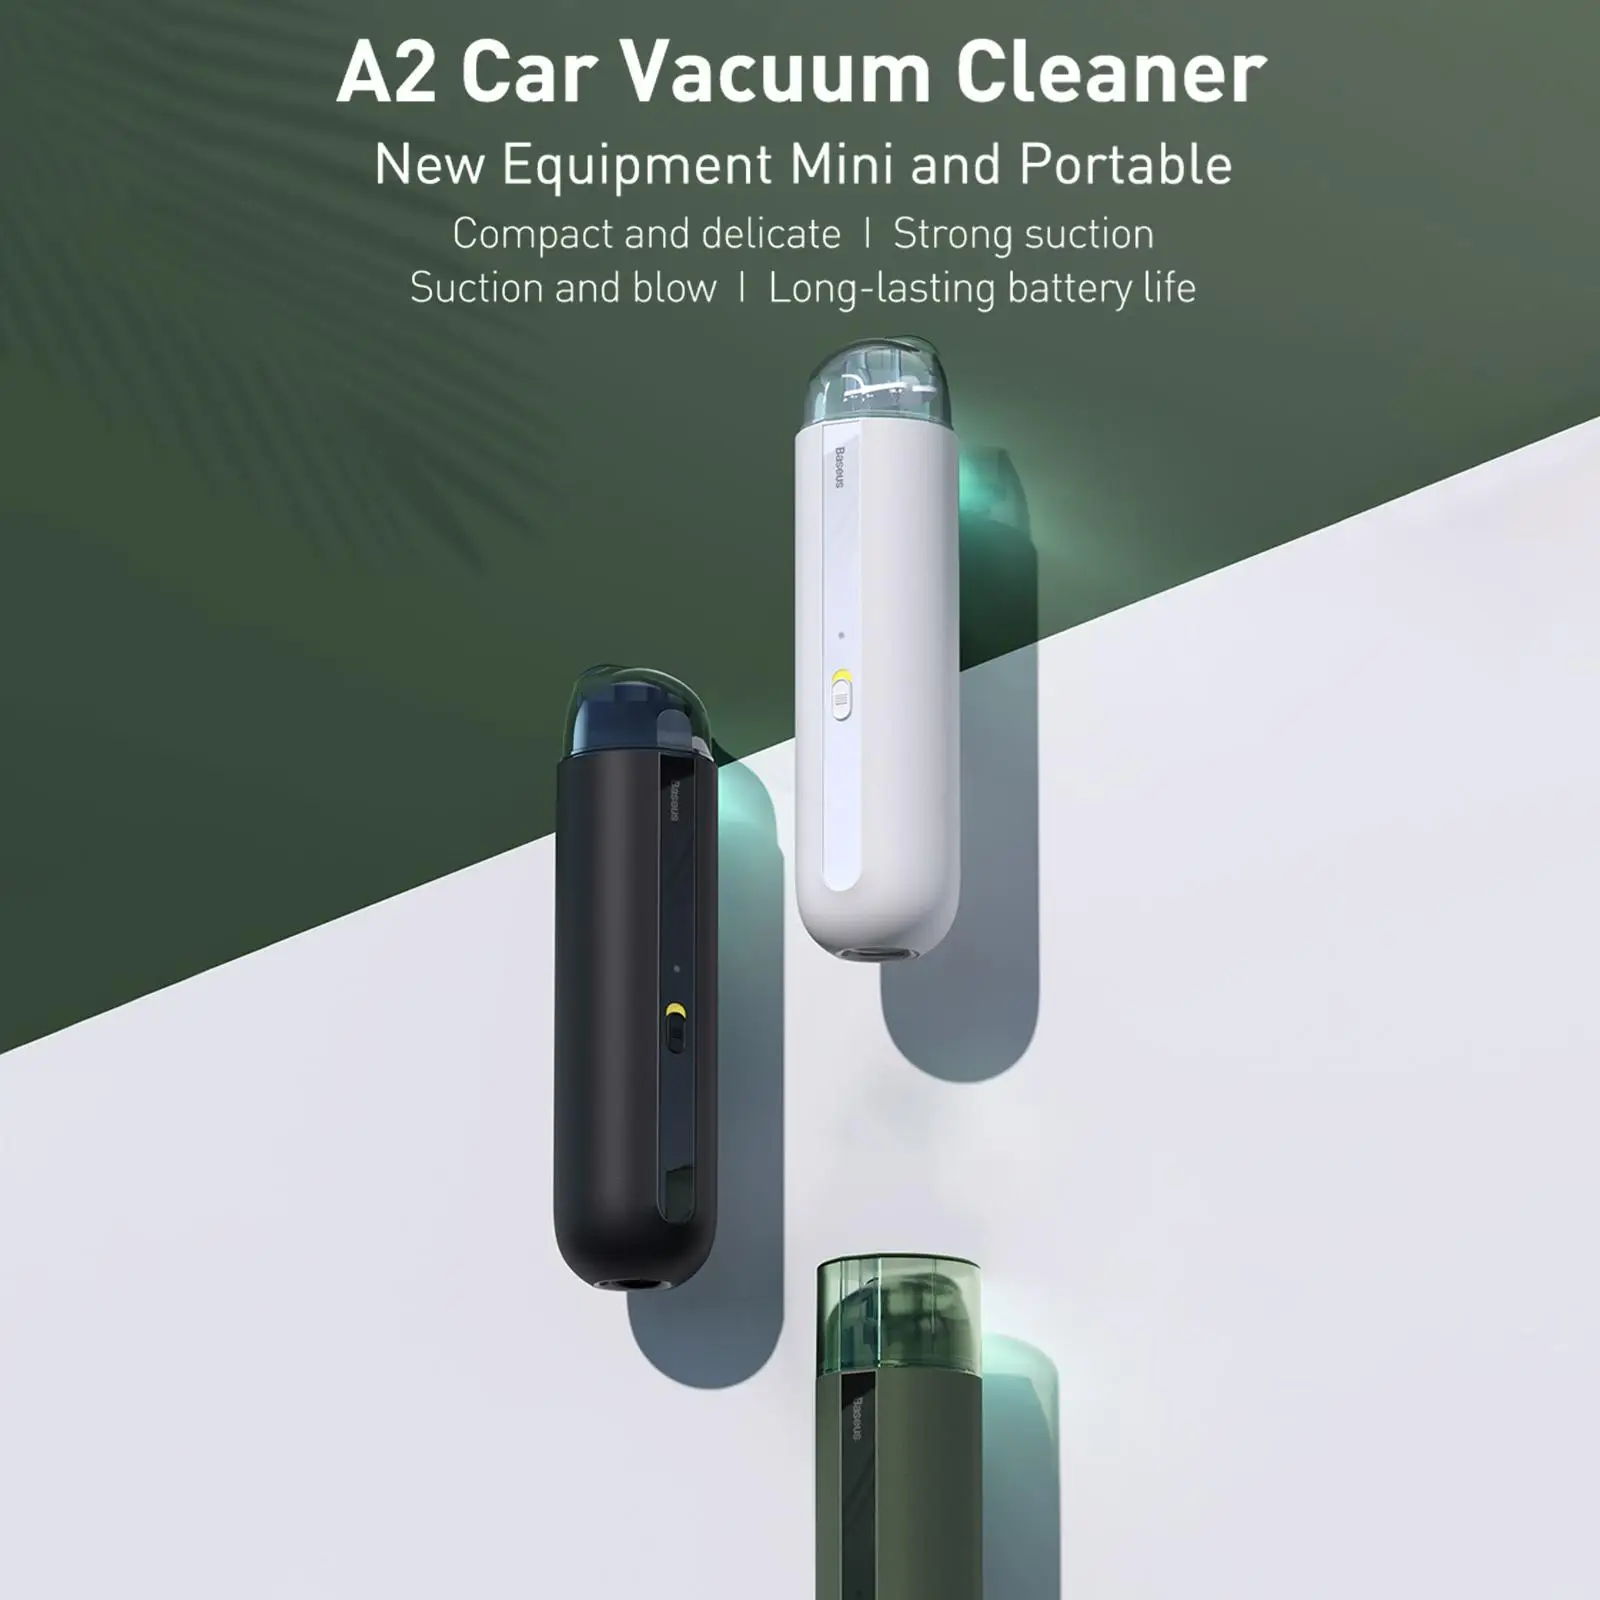 Portable Handheld Vacuum Cleaner Auto Accessories Cleaning Car Interior USB Rechargeable for Carpet Office Car Sofa Home